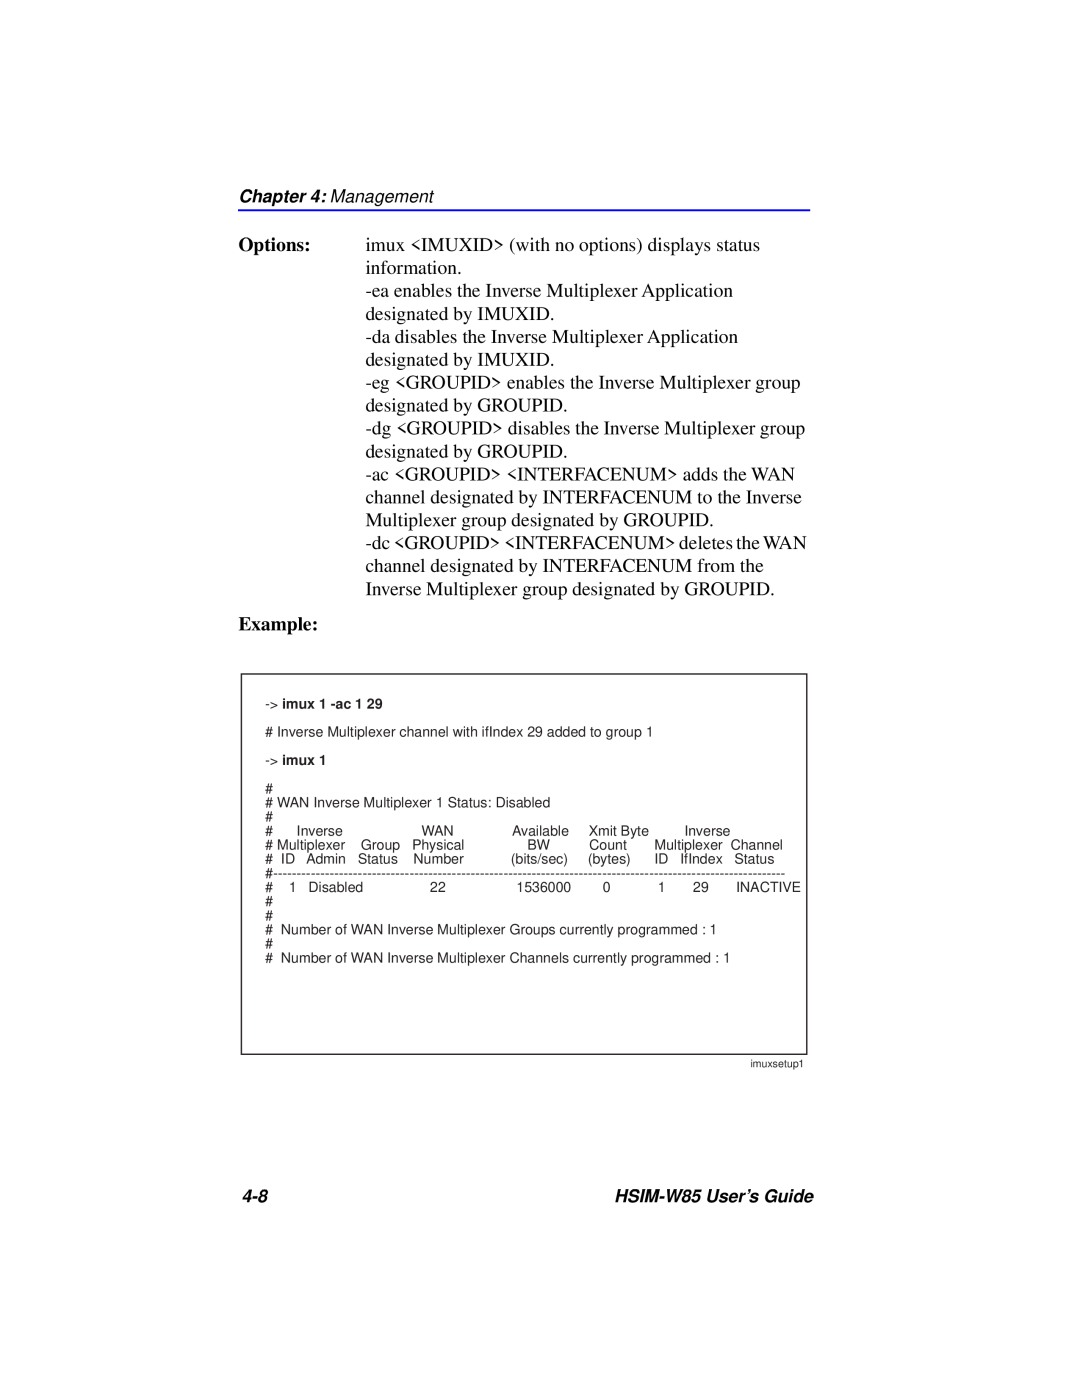 Cabletron Systems W85 manual Example 